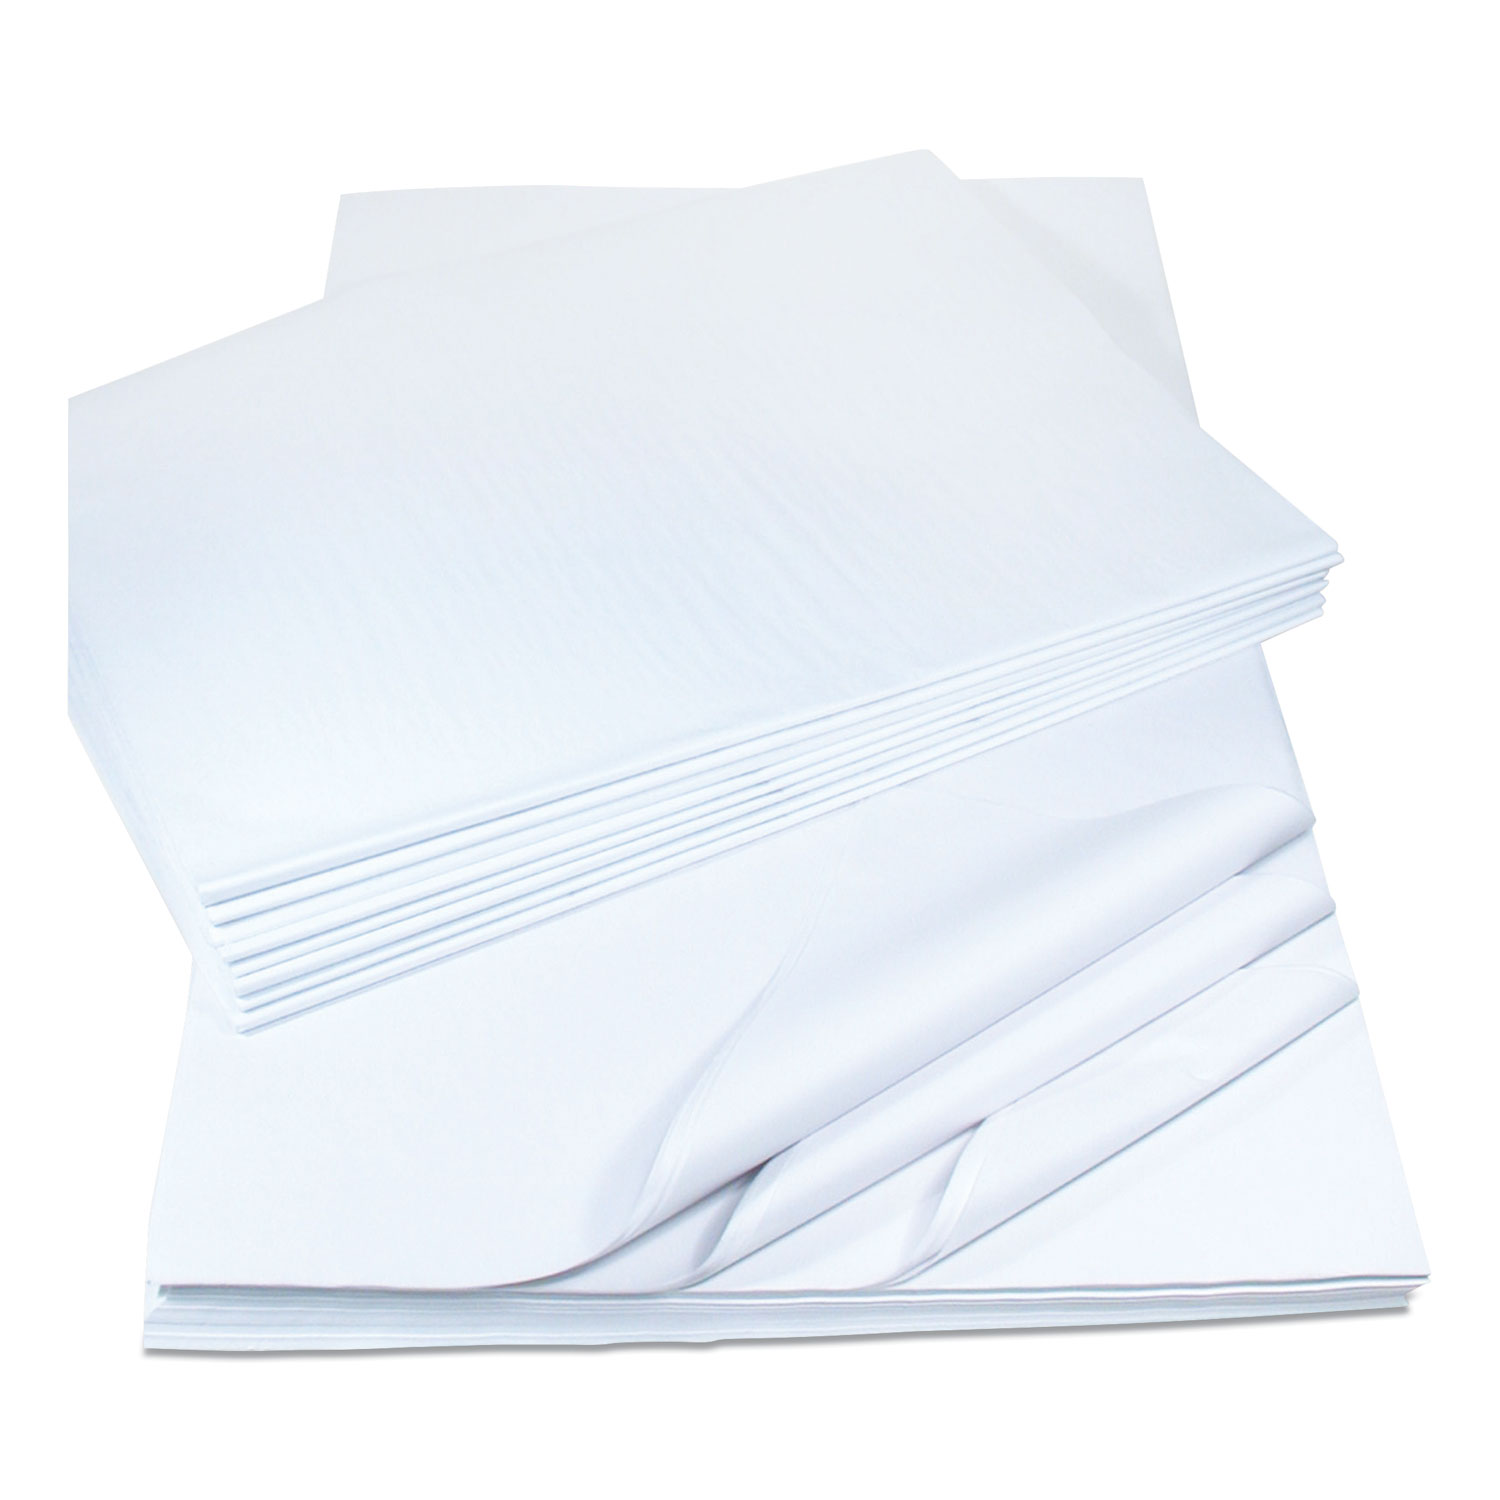 480 Sheets - 15 x 20 in. Packing Paper Sheets for Gift Wrapping and Packing, Tissue Paper Ream - Black